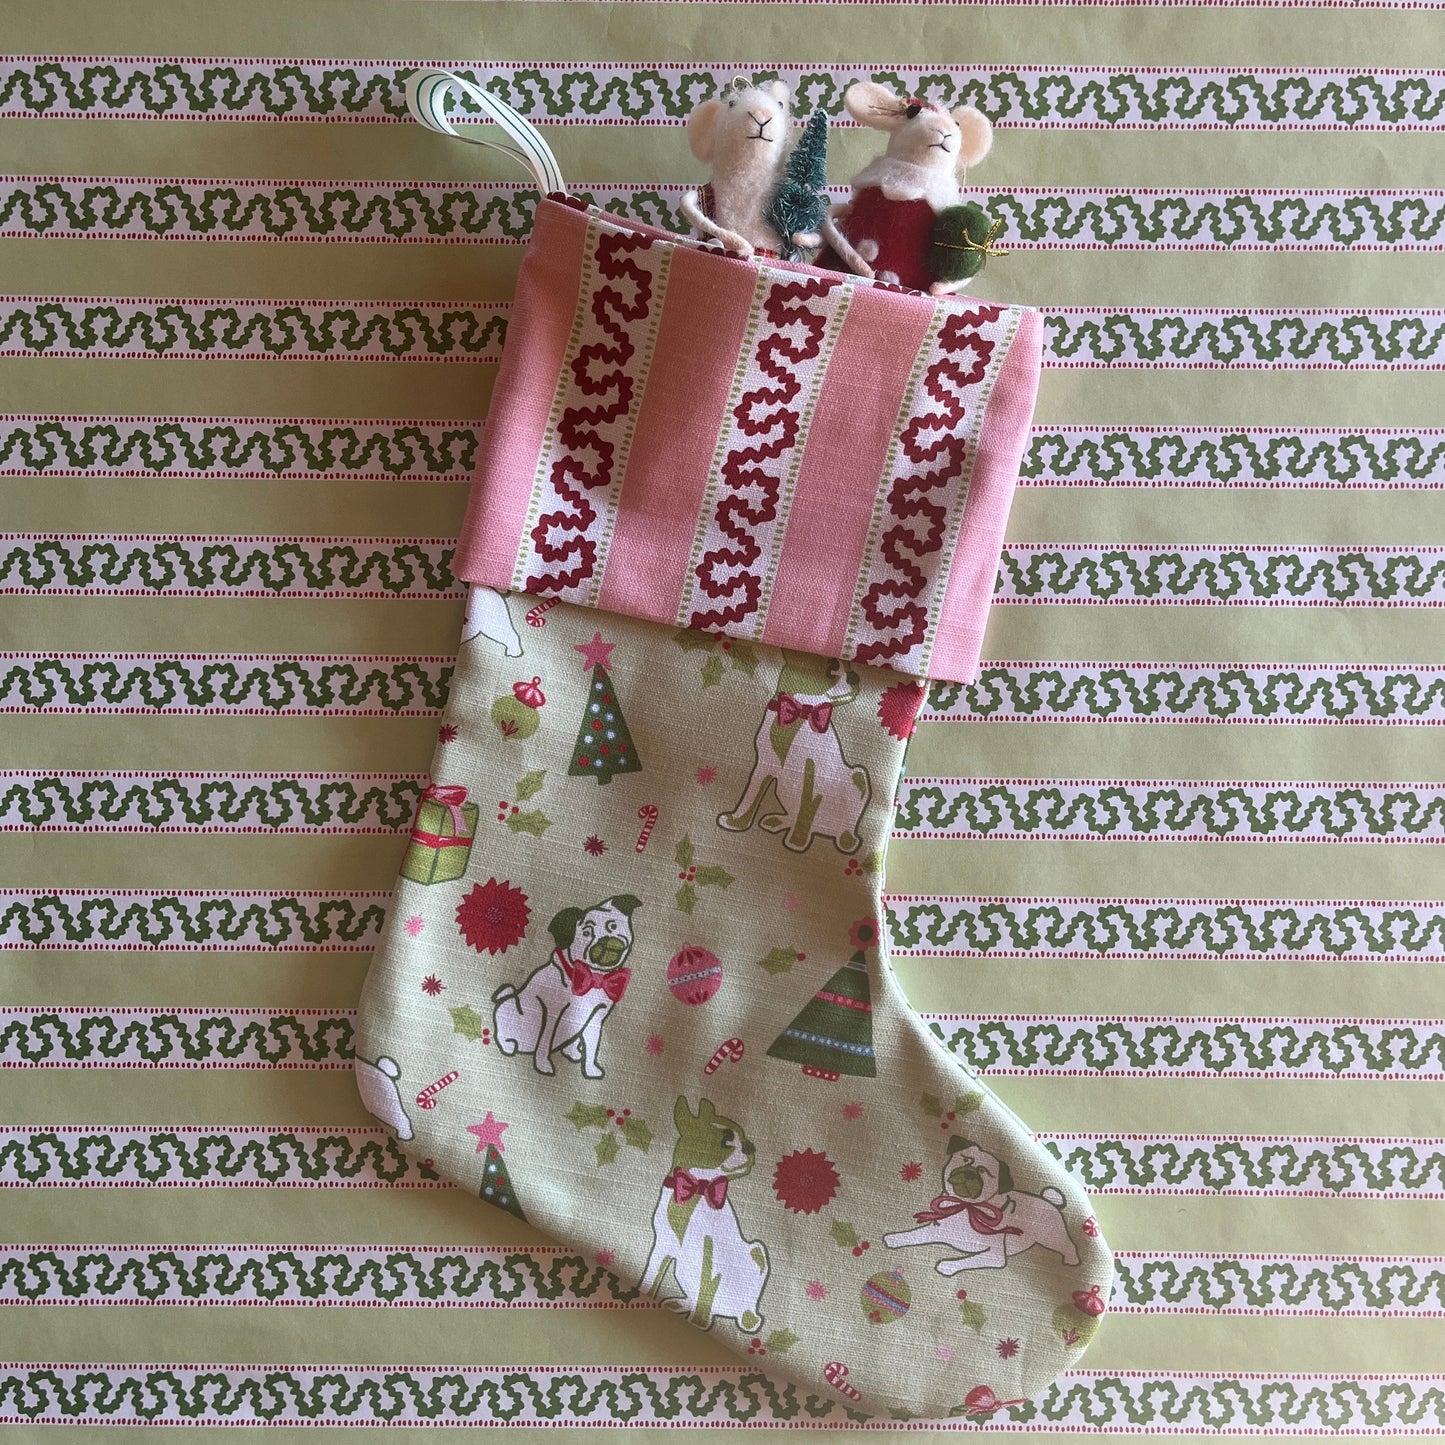 Readymade Deck the Halls Holiday Stocking